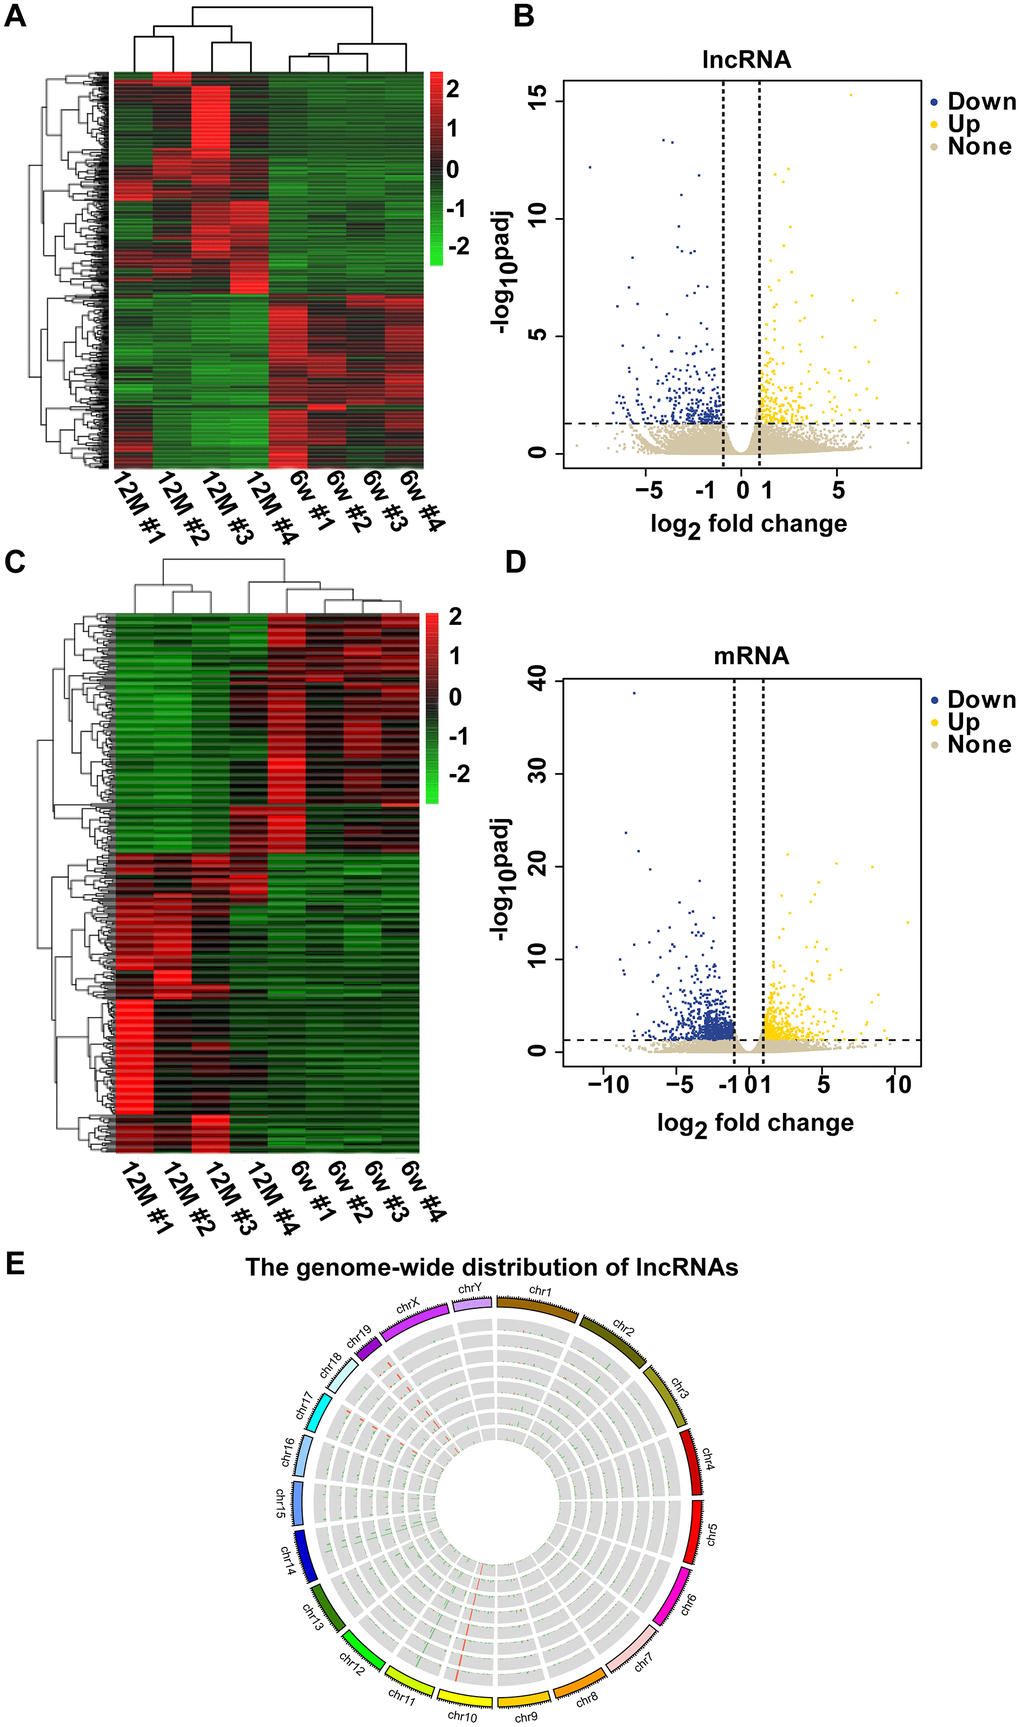 Clustering analysis of differentially expressed lncRNAs and mRNAs in a pair of six-week-old and one-year-old mice. The heat maps show the expression levels of differentially expressed lncRNAs (A) and mRNAs (C) between six-week-old and one-year-old mice. Items in red represent upregulated lncRNAs or mRNAs, and green items represent downregulated lncRNAs or mRNAs. Each row exhibited a lncRNA or mRNA, and each column exhibited a sample. The gradient color barcode at the top right indicates the log2 FPKM. Scatter plots of all expressed lncRNAs (B) and mRNAs (D) in six-week-old versus one-year-old mice. The X-axis presents the log2 fold change of lncRNA or mRNA expression. Yellow indicates upregulated lncRNAs or mRNAs, blue indicates downregulated lncRNAs or mRNAs, and gray indicates nonregulated lncRNAs or mRNAs. The vertical dotted lines indicate |log2 fold change| = 1. (E) Circular representation of the genome-wide distribution of the expression of detected lncRNAs by RNA sequencing. Each single circle represents a sample.